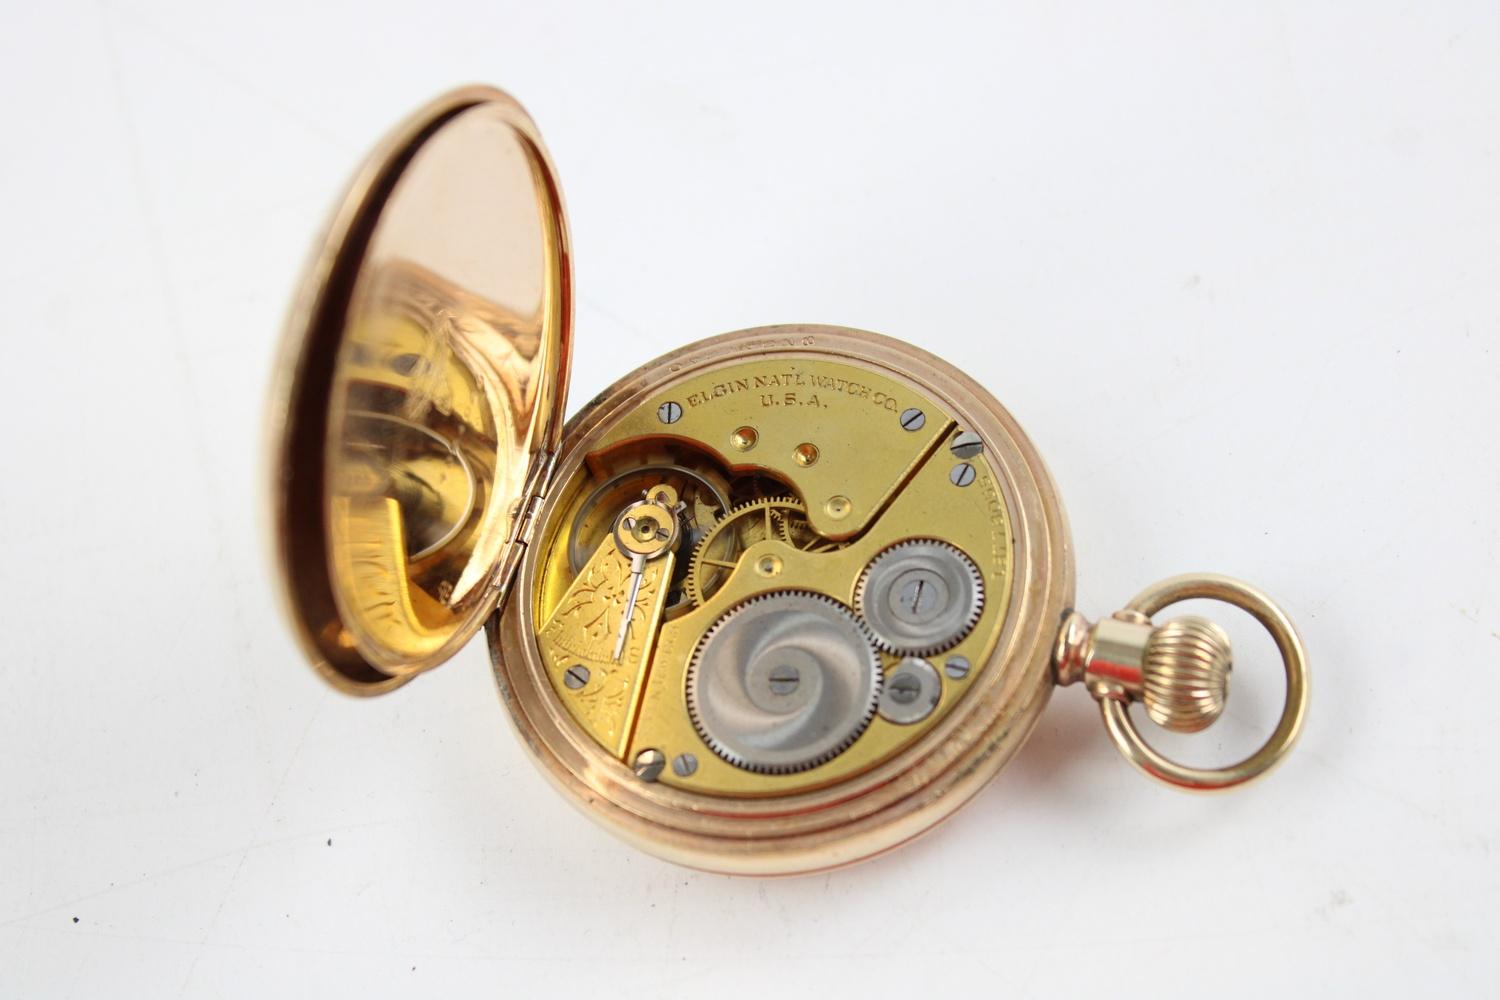 Vintage Gents ELGIN Rolled Gold Full Hinter POCKET WATCH Hand-Wind WORKING w/ 7 Jewel Movement - Image 3 of 3